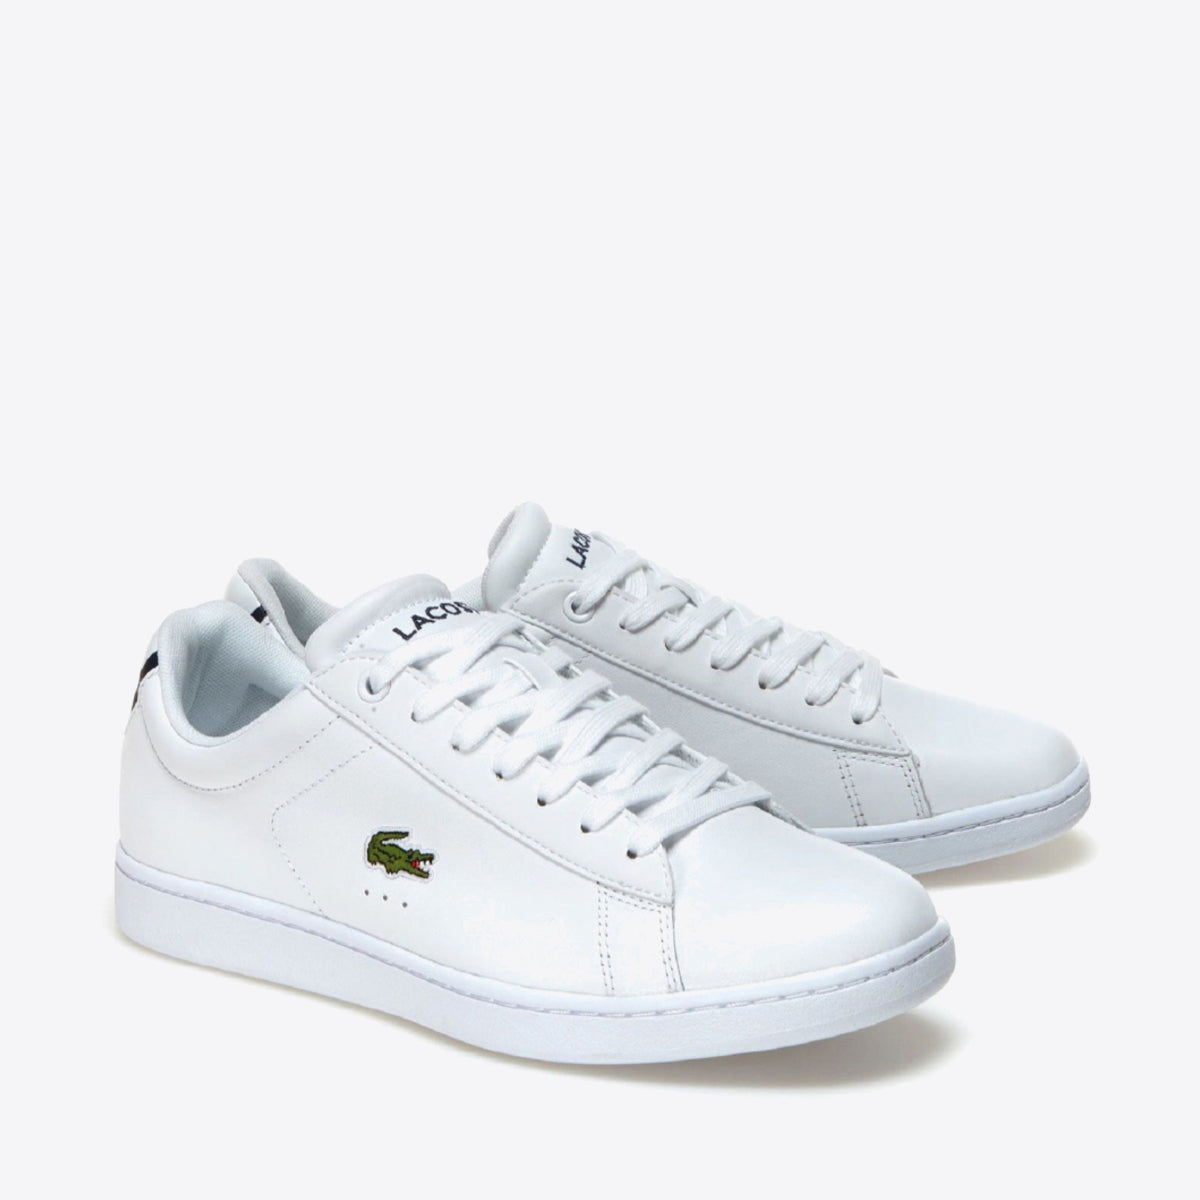 LACOSTE Carnaby Evo Trainer White - Image 4